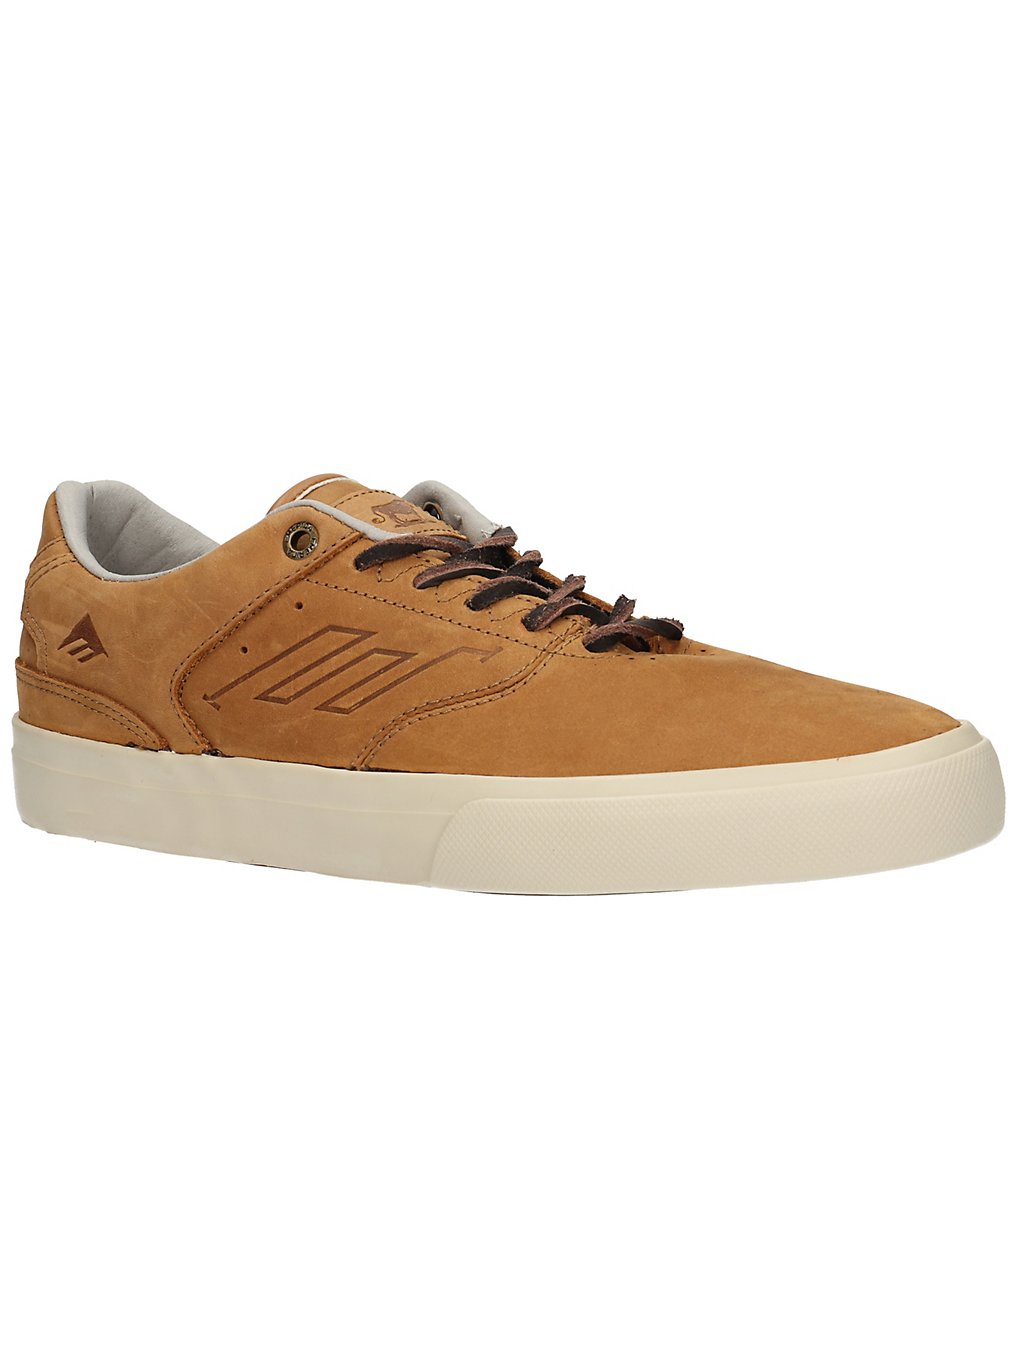 Emerica The Low Vulc Skate Shoes brown